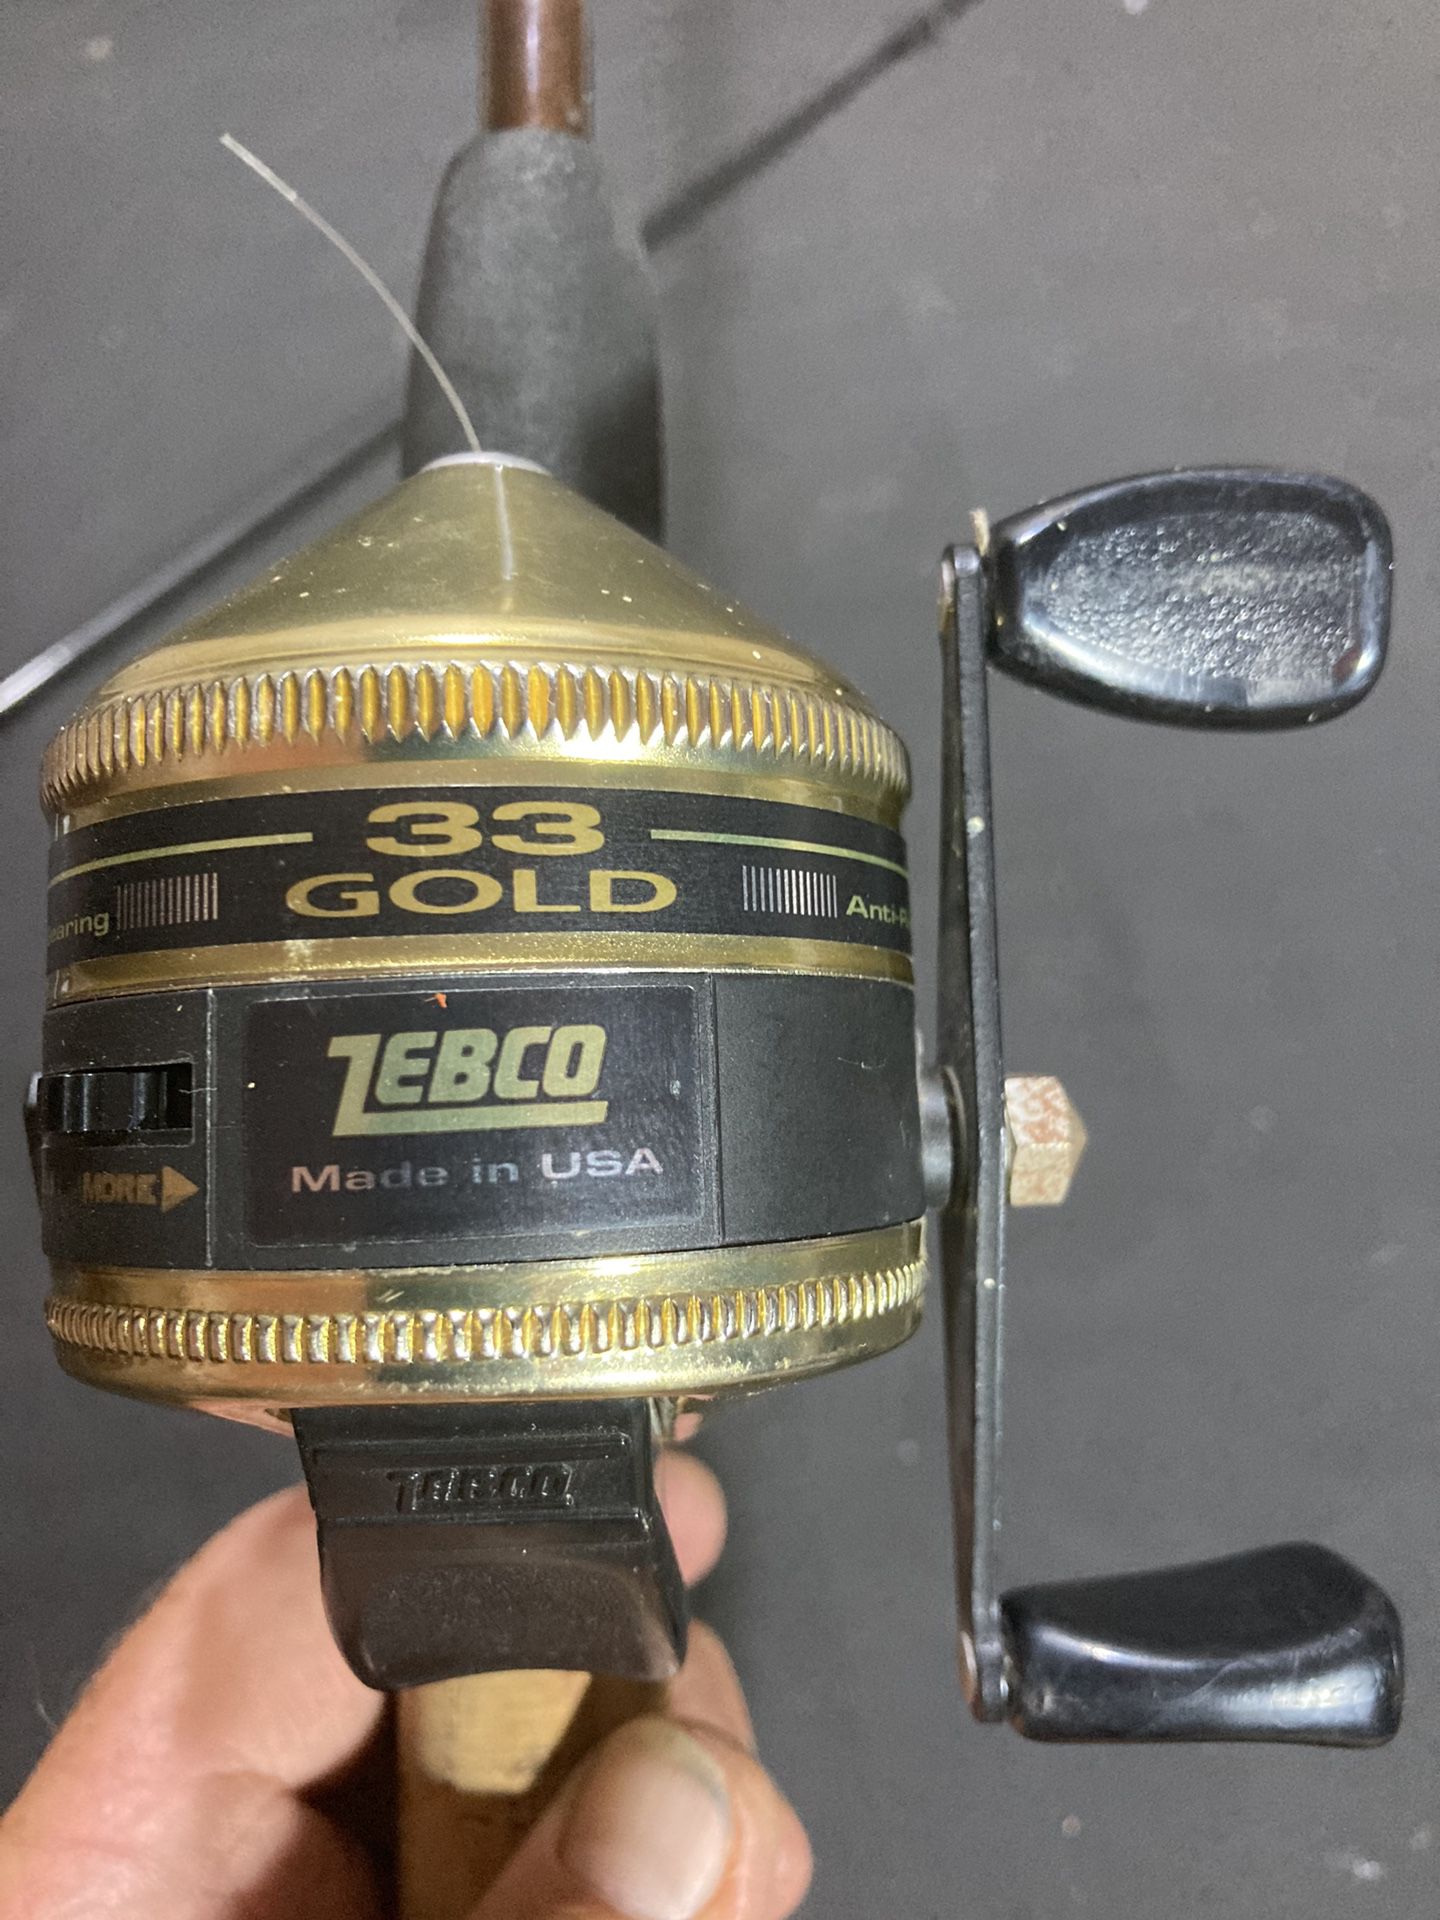 Zebco 33, Gold 50 Classic Combo for Sale in San Antonio, TX - OfferUp